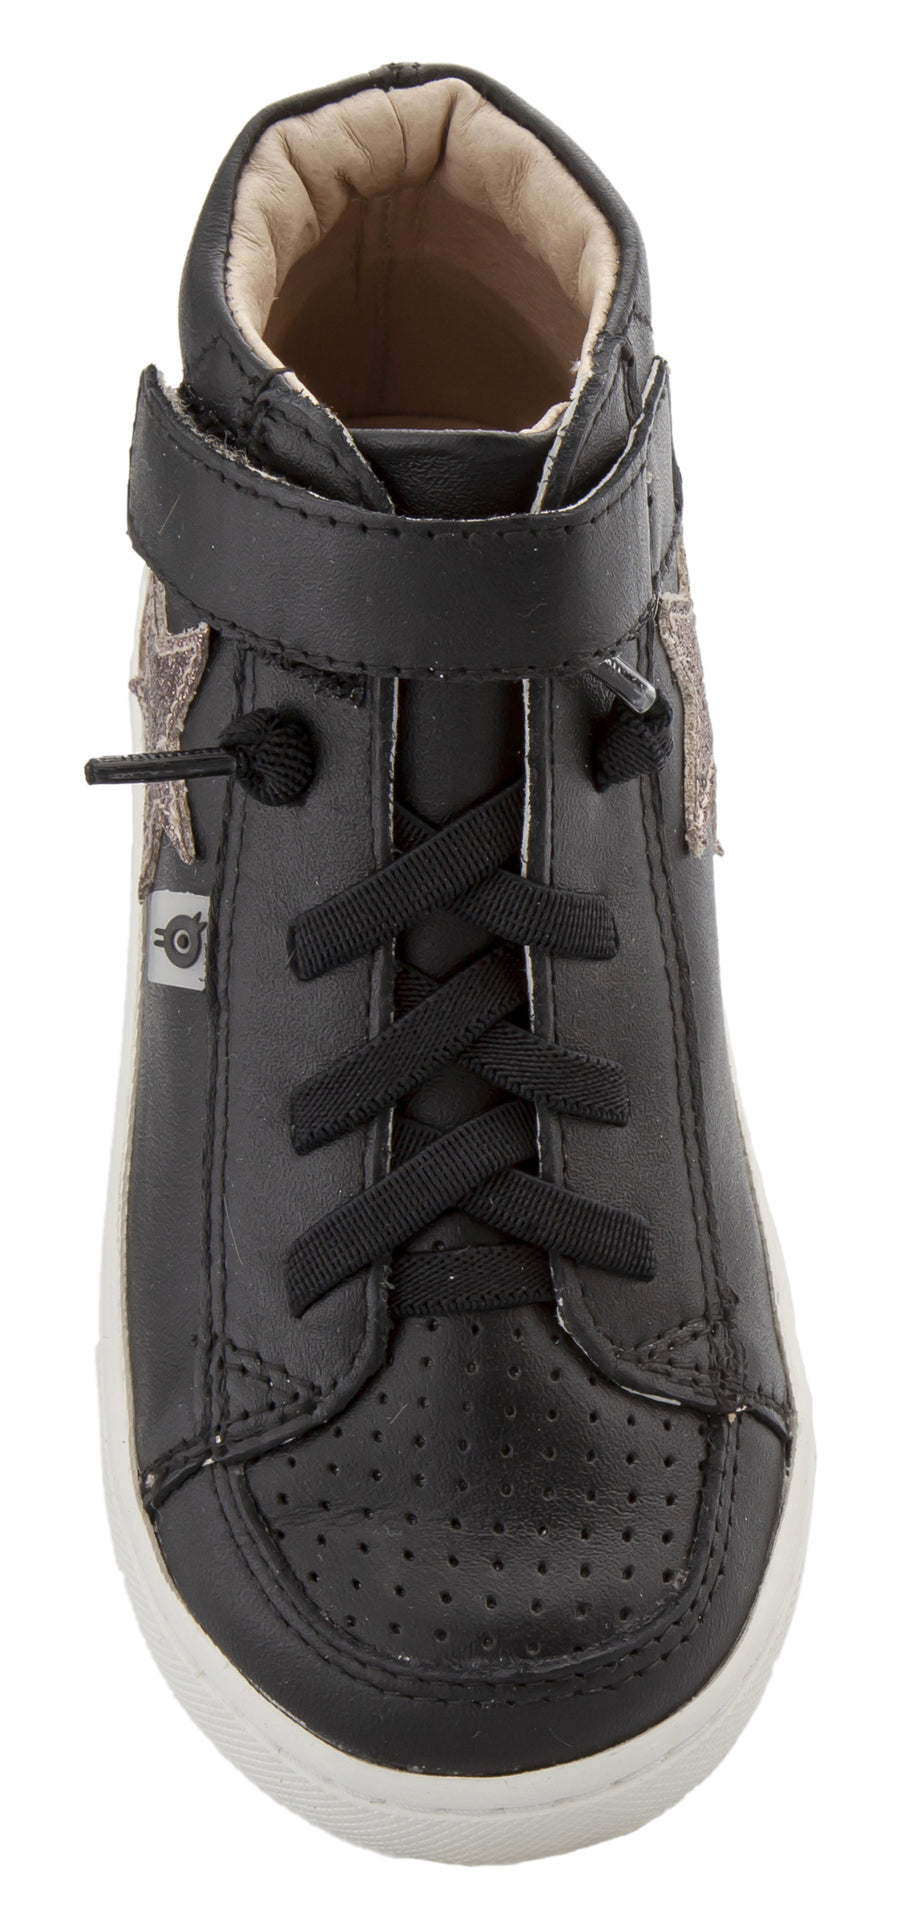 Old Soles Boy's & Girl's 6104 Champster Sneakers - Black/Glam Choc/Titanium